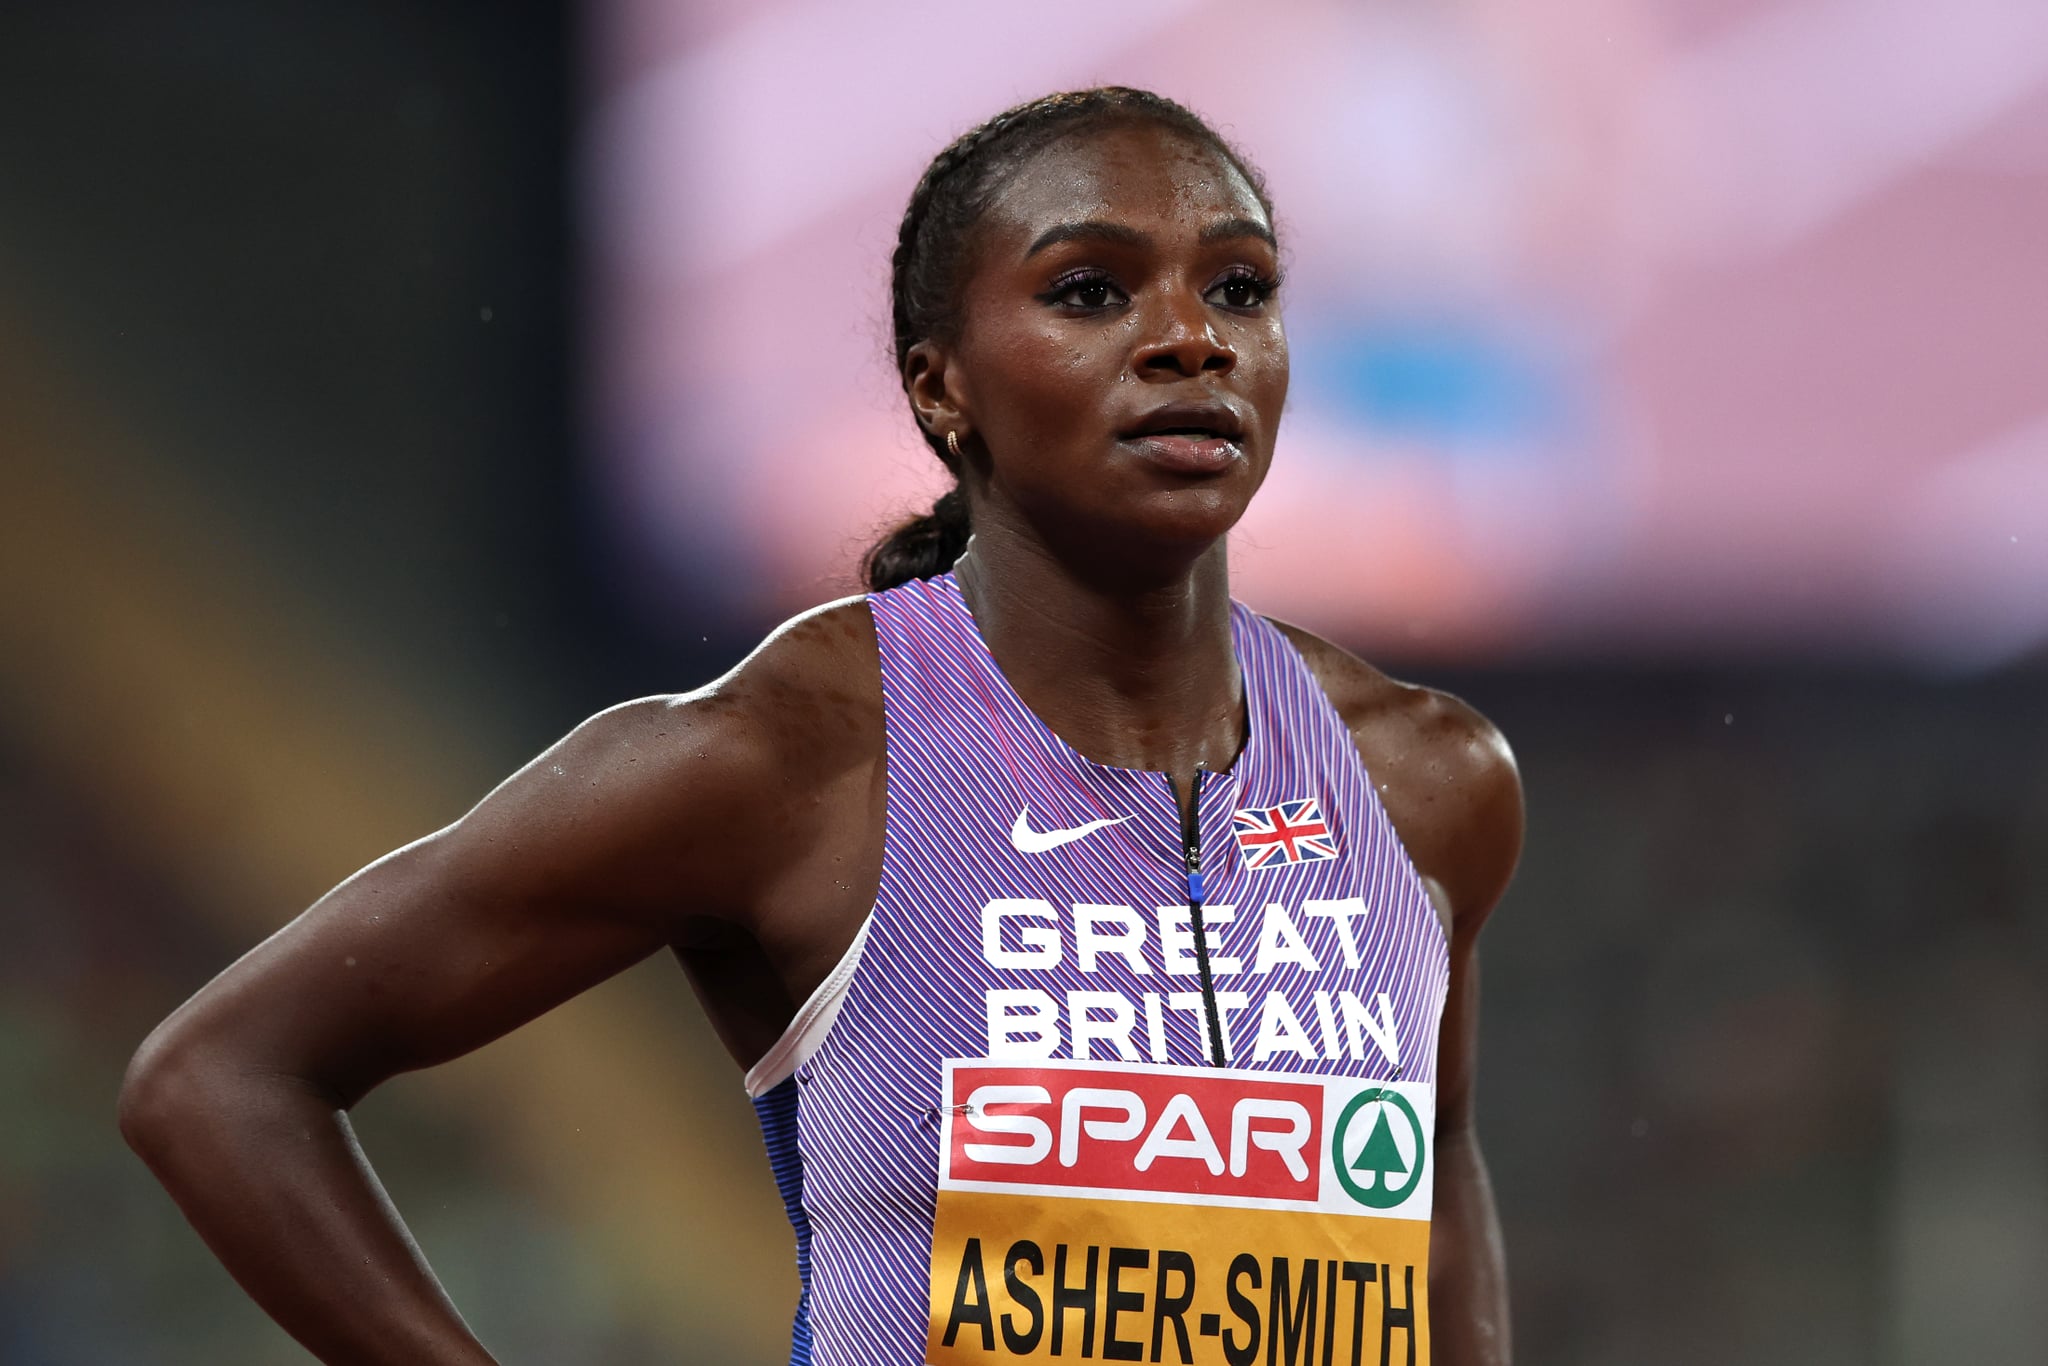 MUNICH, GERMANY - AUGUST 18: Dina Asher-Smith of Great Britain looks on after the Athletics - Women's 200m Semi Final 2 on day 8 of the European Championships Munich 2022 at Olympiapark on August 18, 2022 in Munich, Germany. (Photo by Maja Hitij/Getty Images)